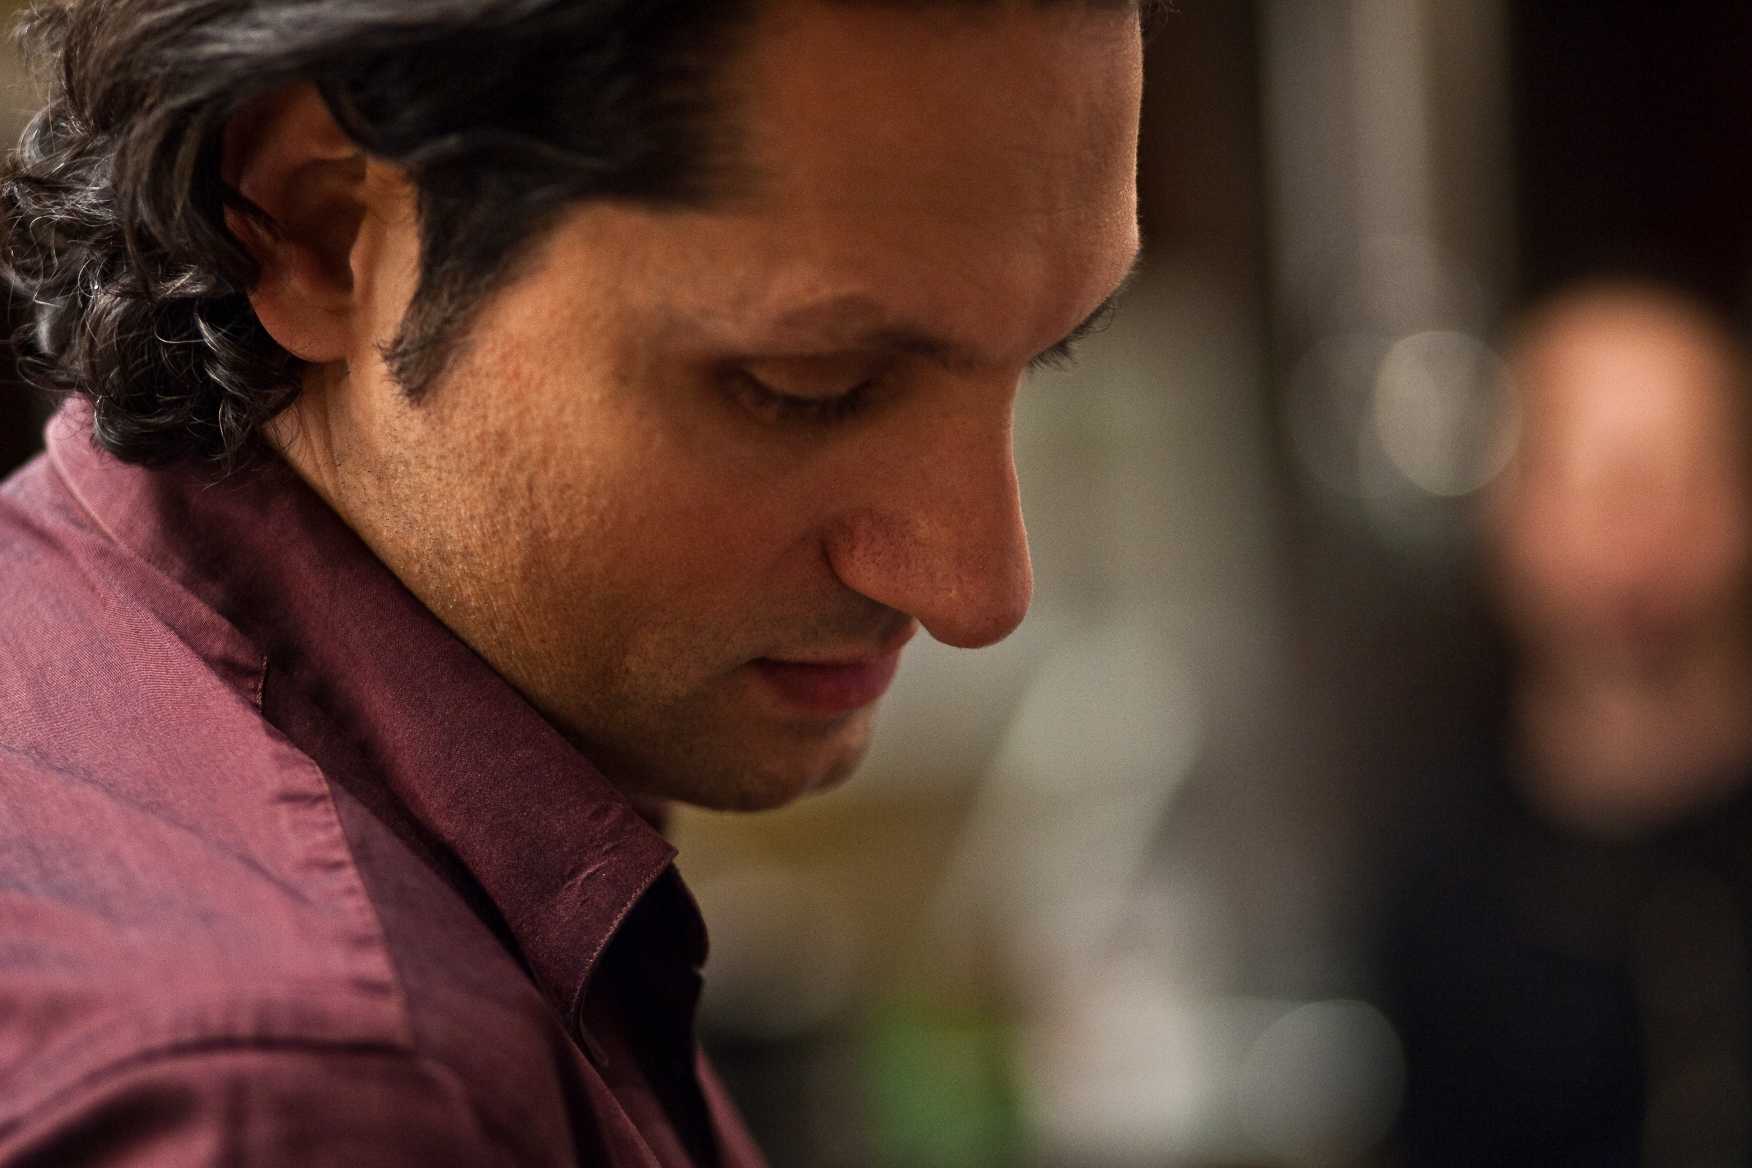 Still of Danny Boushebel from WHAT MAKES JADA CLICK.